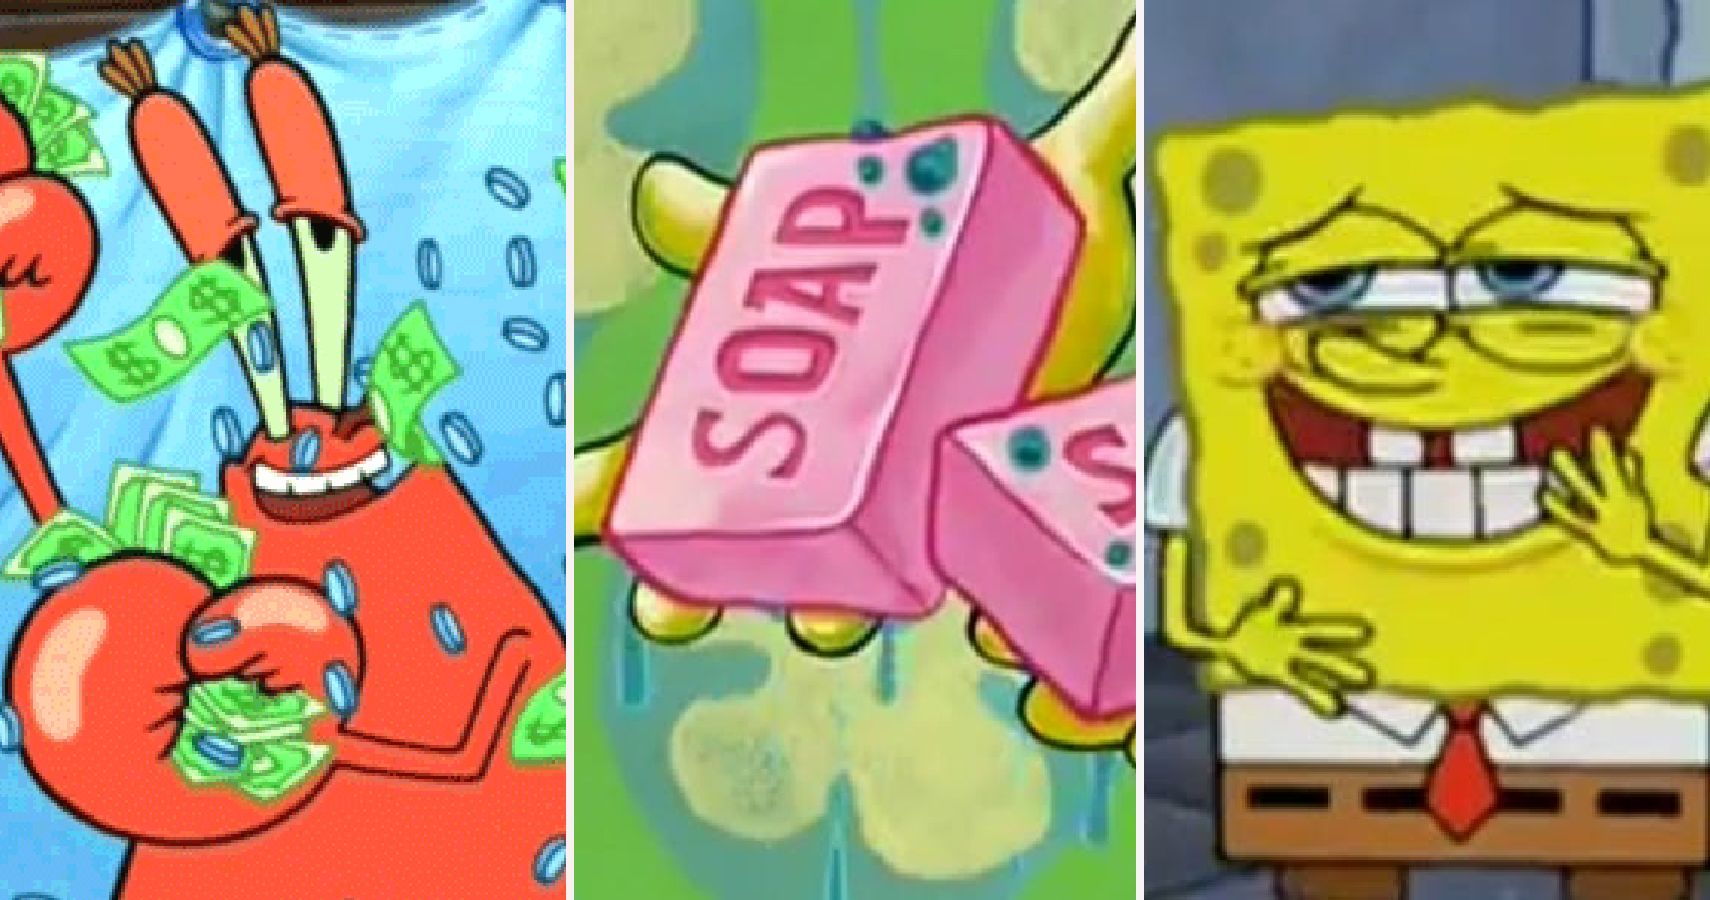 15 Awesome Things You Didn’t Know About SpongeBob SquarePants